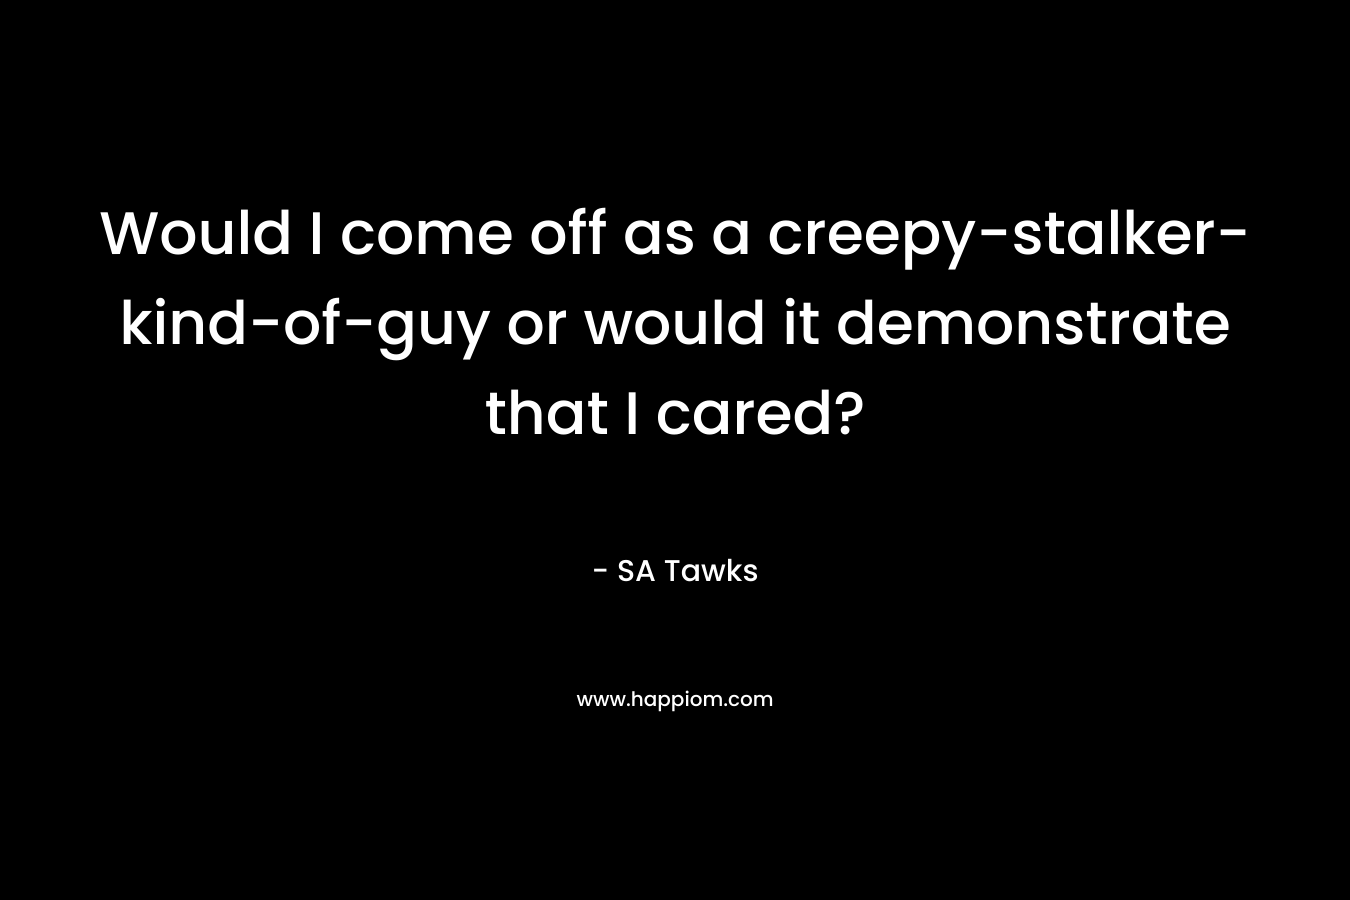 Would I come off as a creepy-stalker-kind-of-guy or would it demonstrate that I cared? – SA Tawks